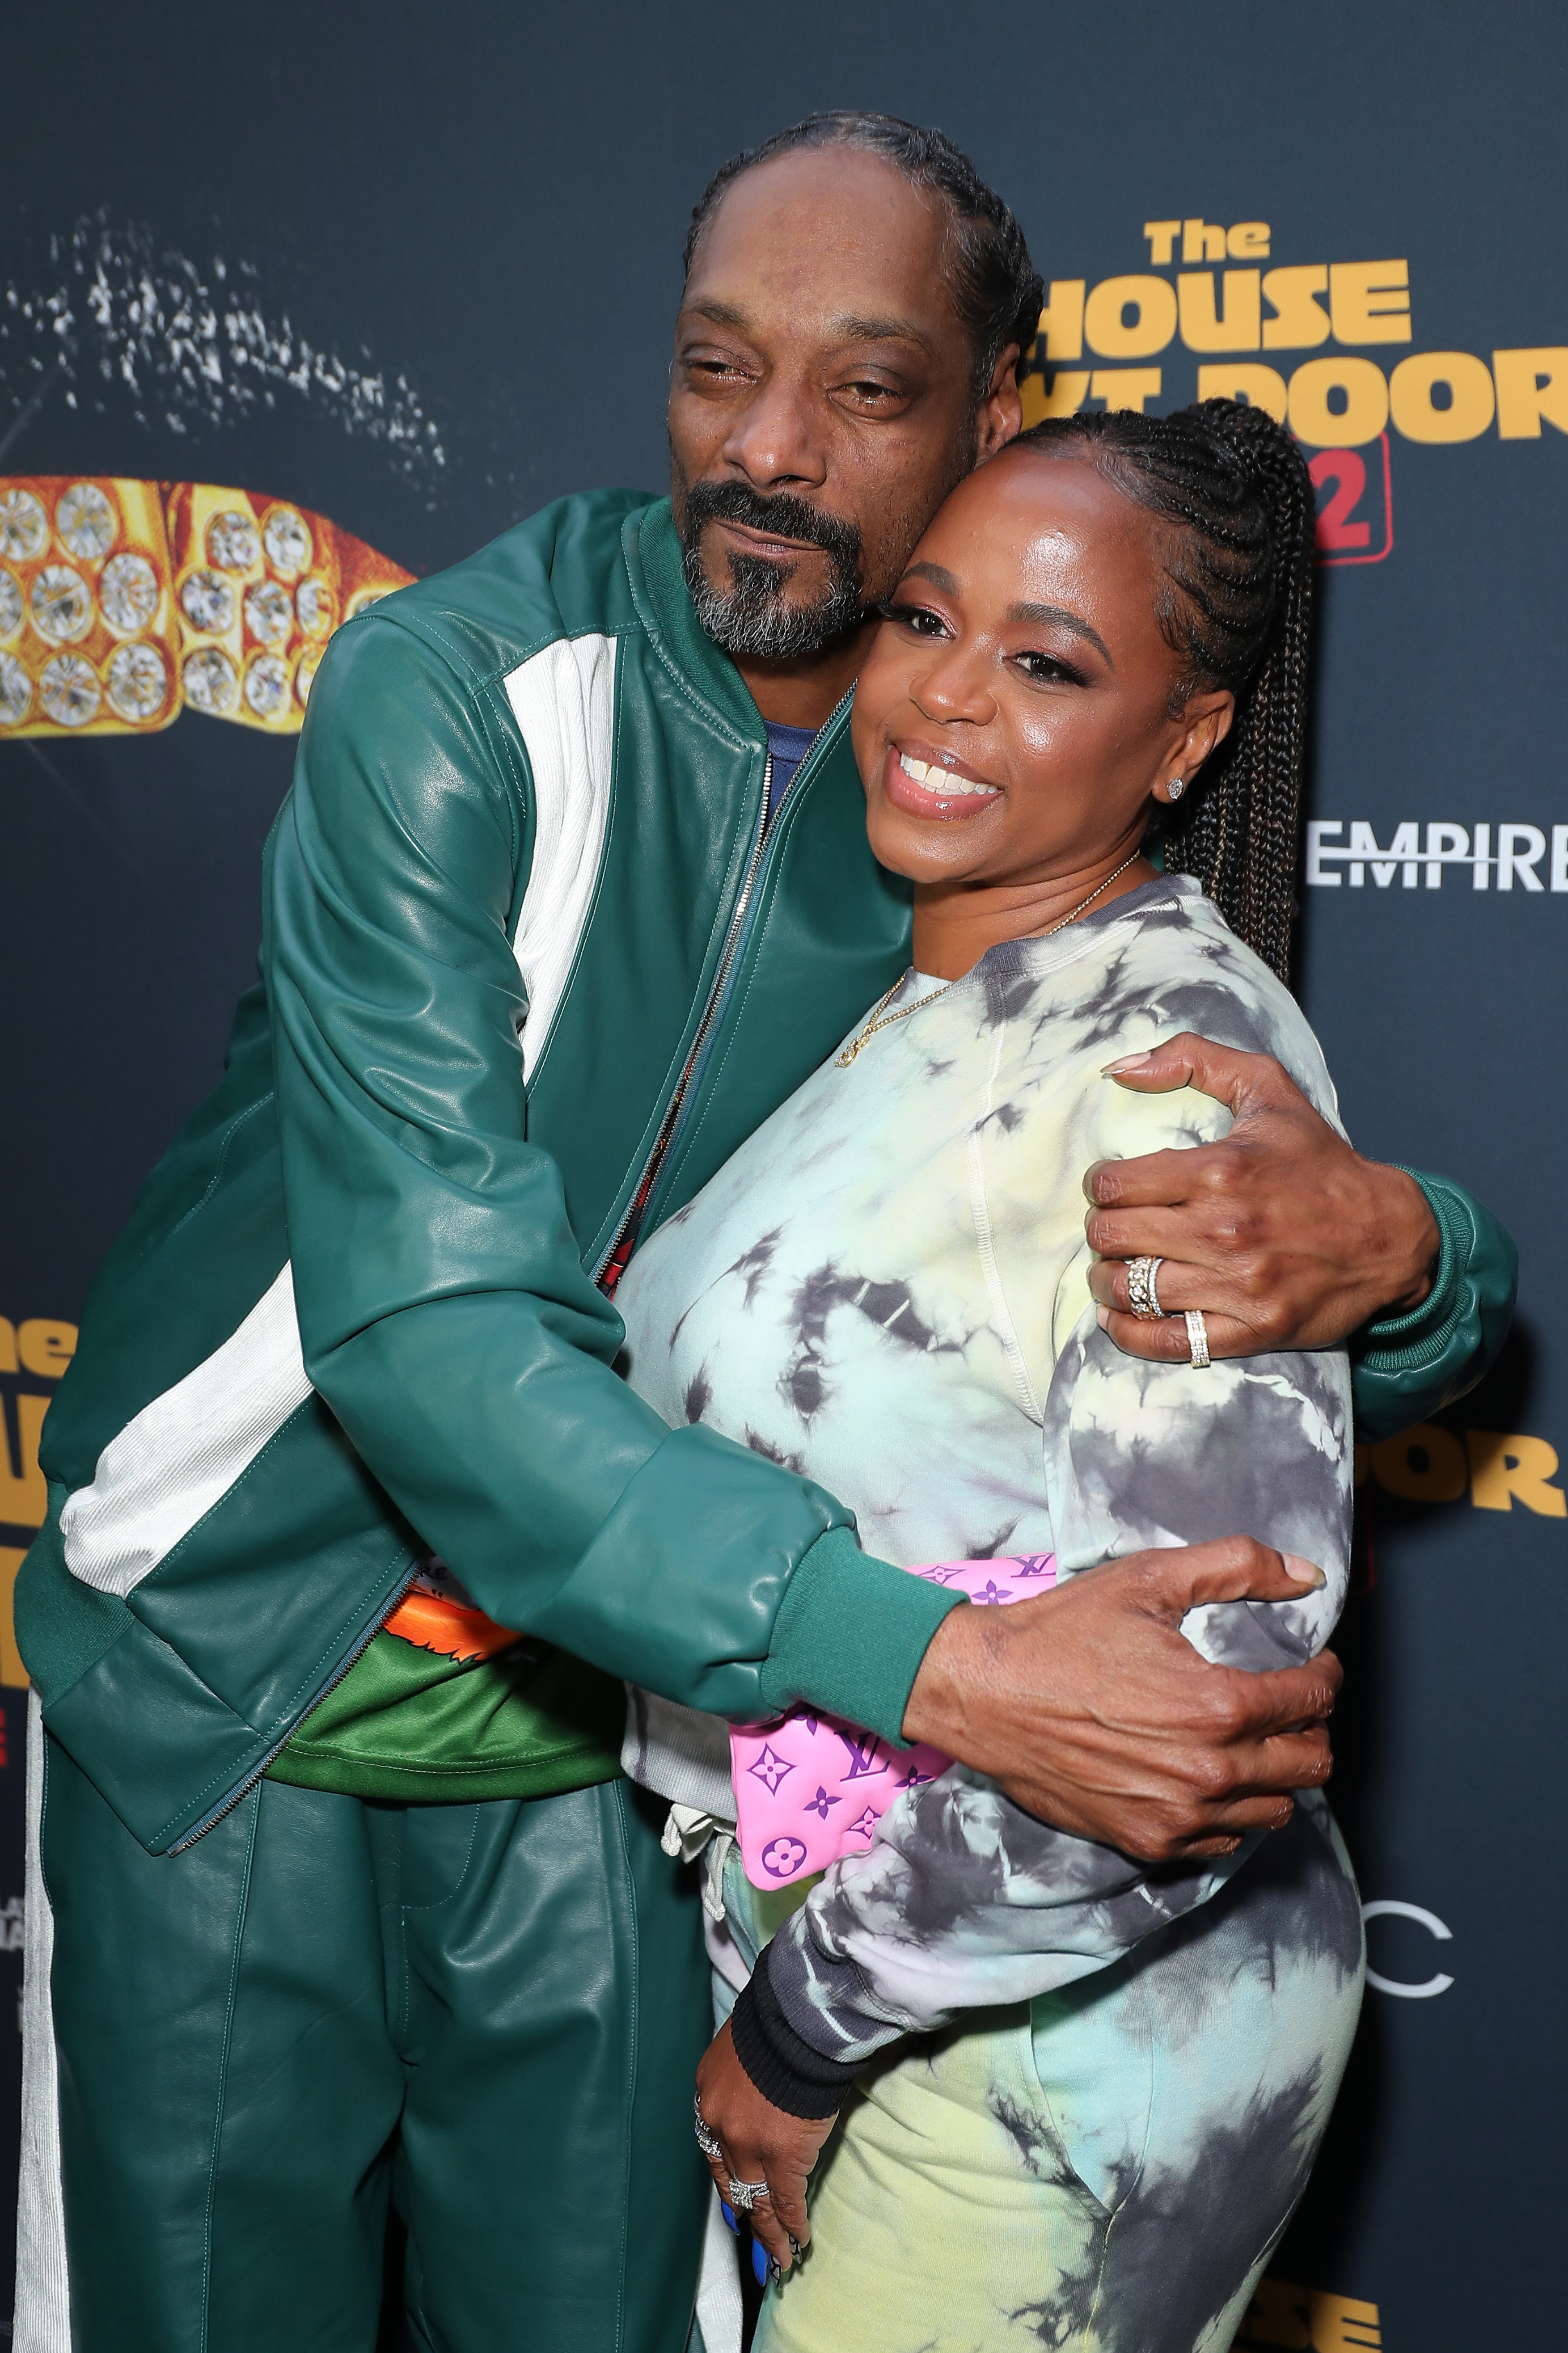 Snoop Dogg and Shante Broadus embrace on the red carpet of the &quot;The House Next Door: Meet the Blacks 2&quot; premiere on June 07, 2021